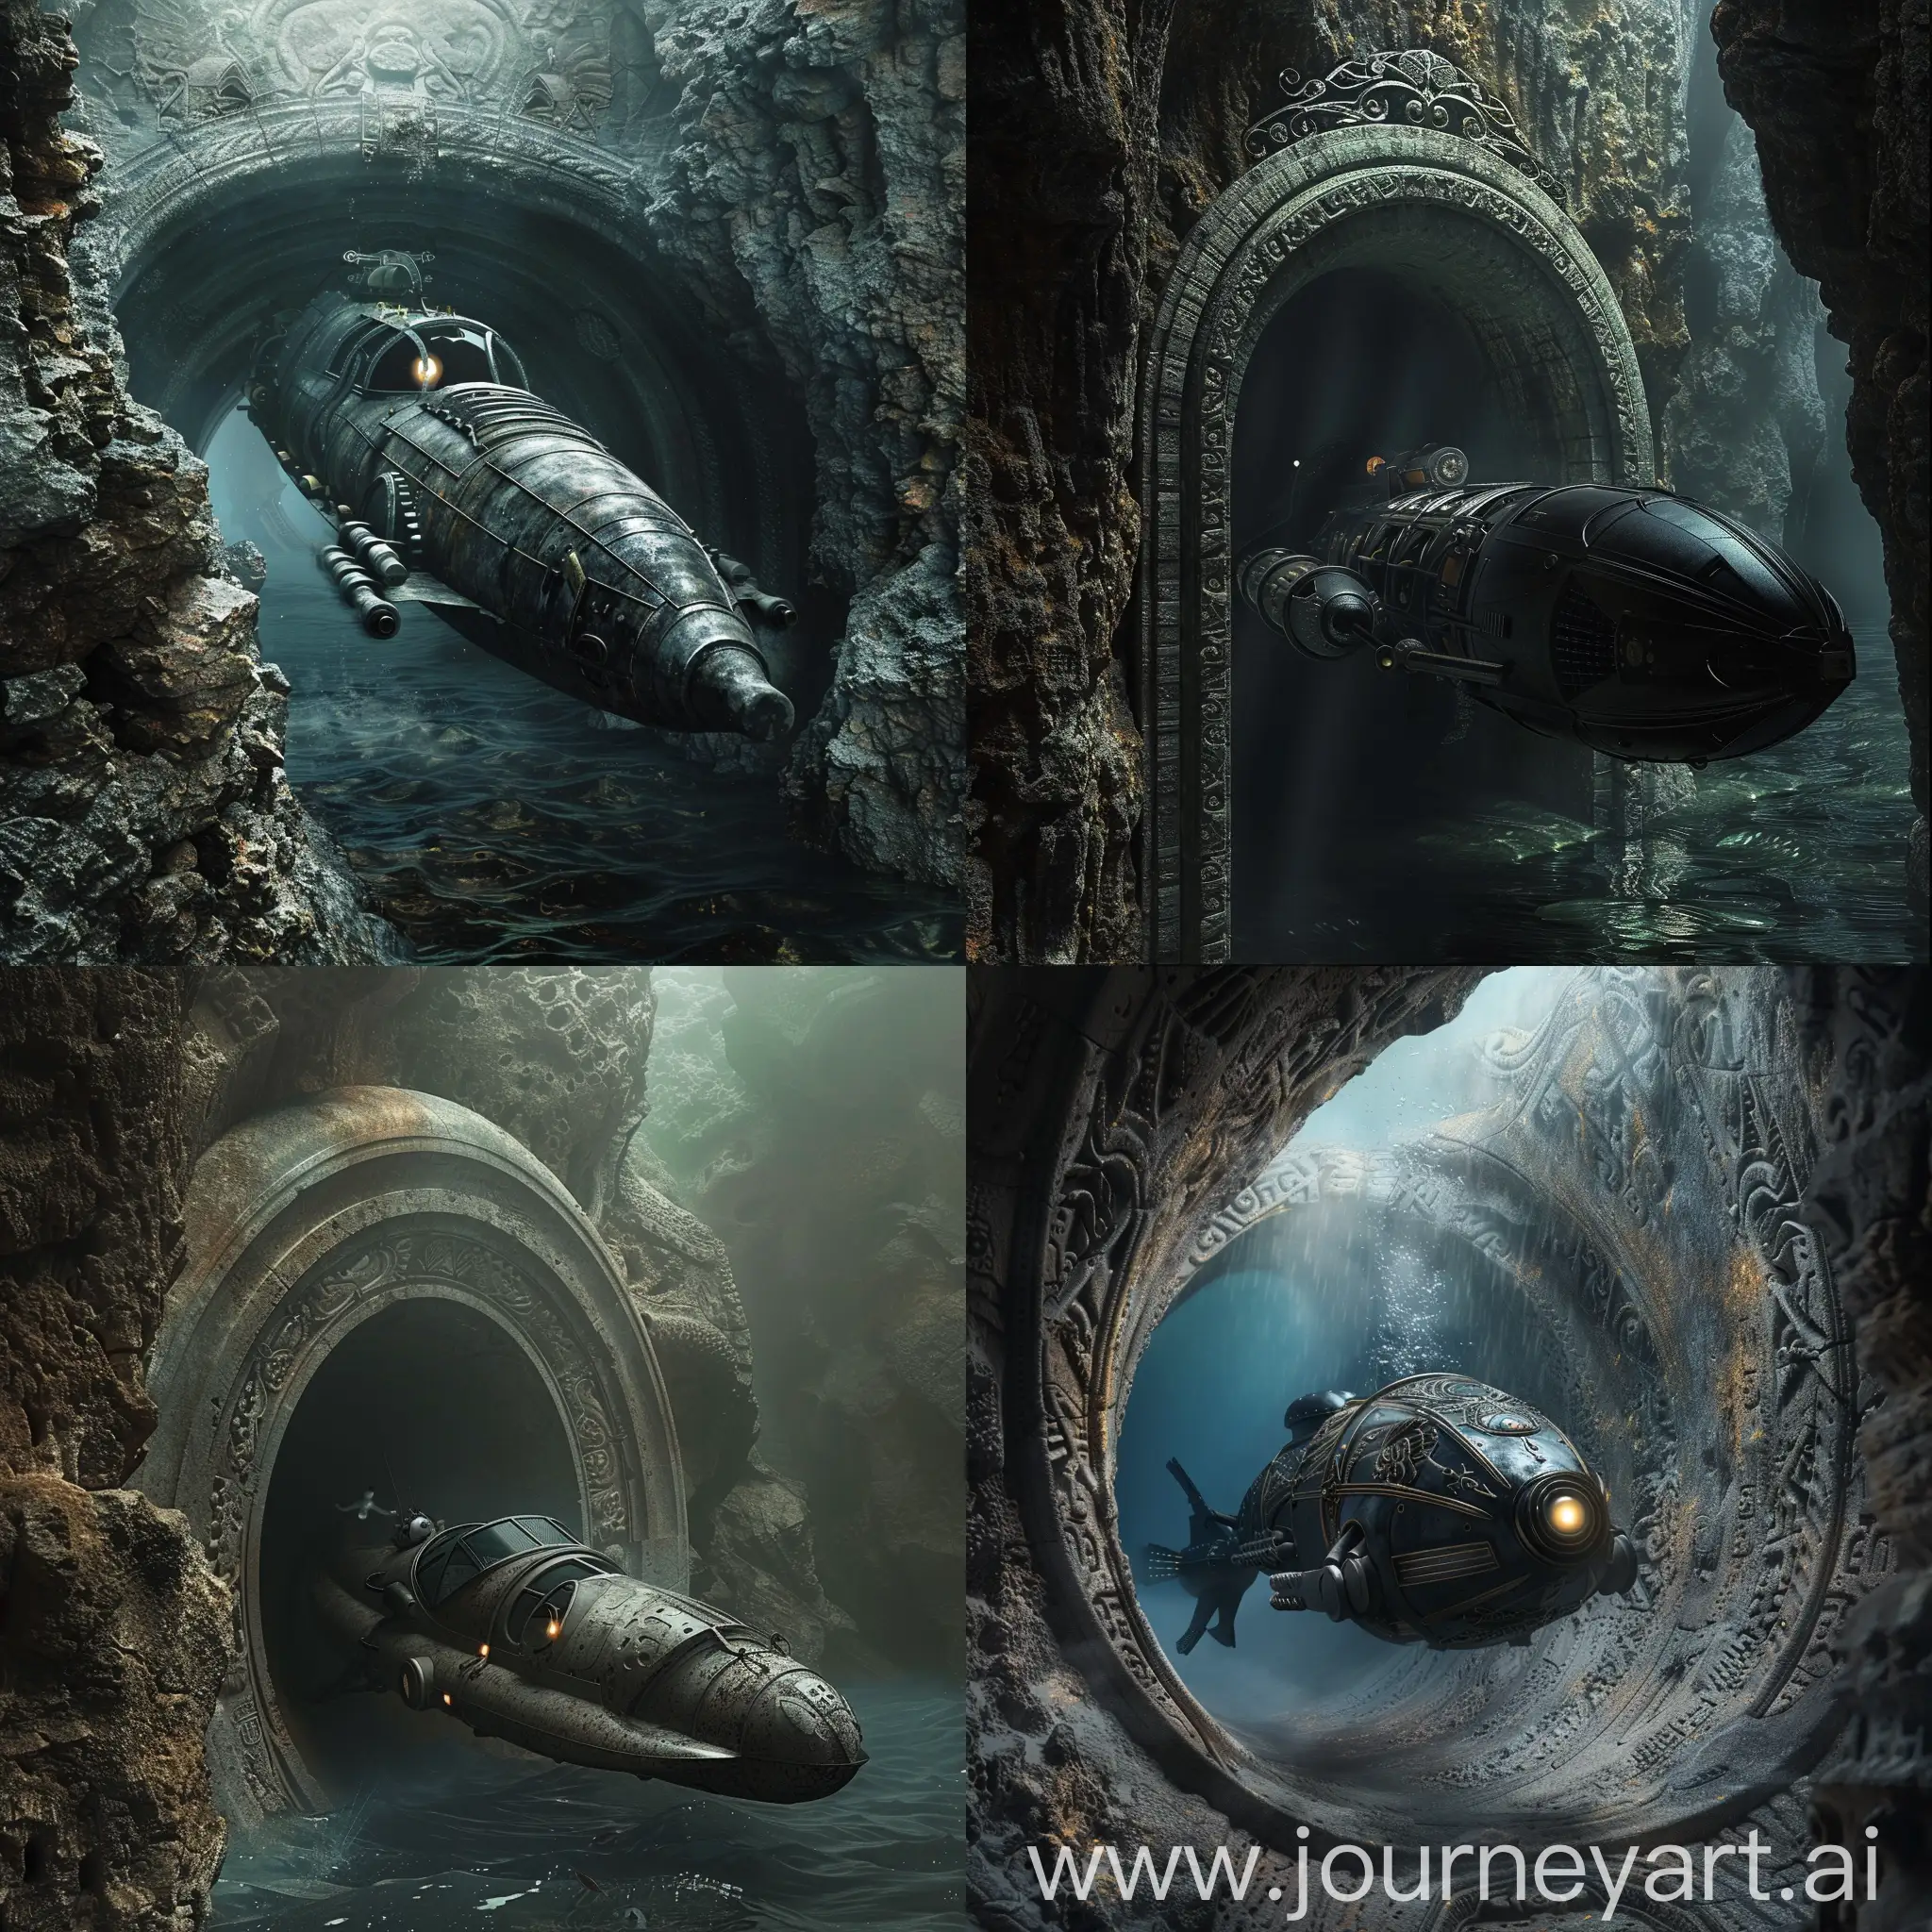 Medieval-Prototype-of-a-Bathyscaphe-Swimming-Through-Carved-Stone-Tunnel